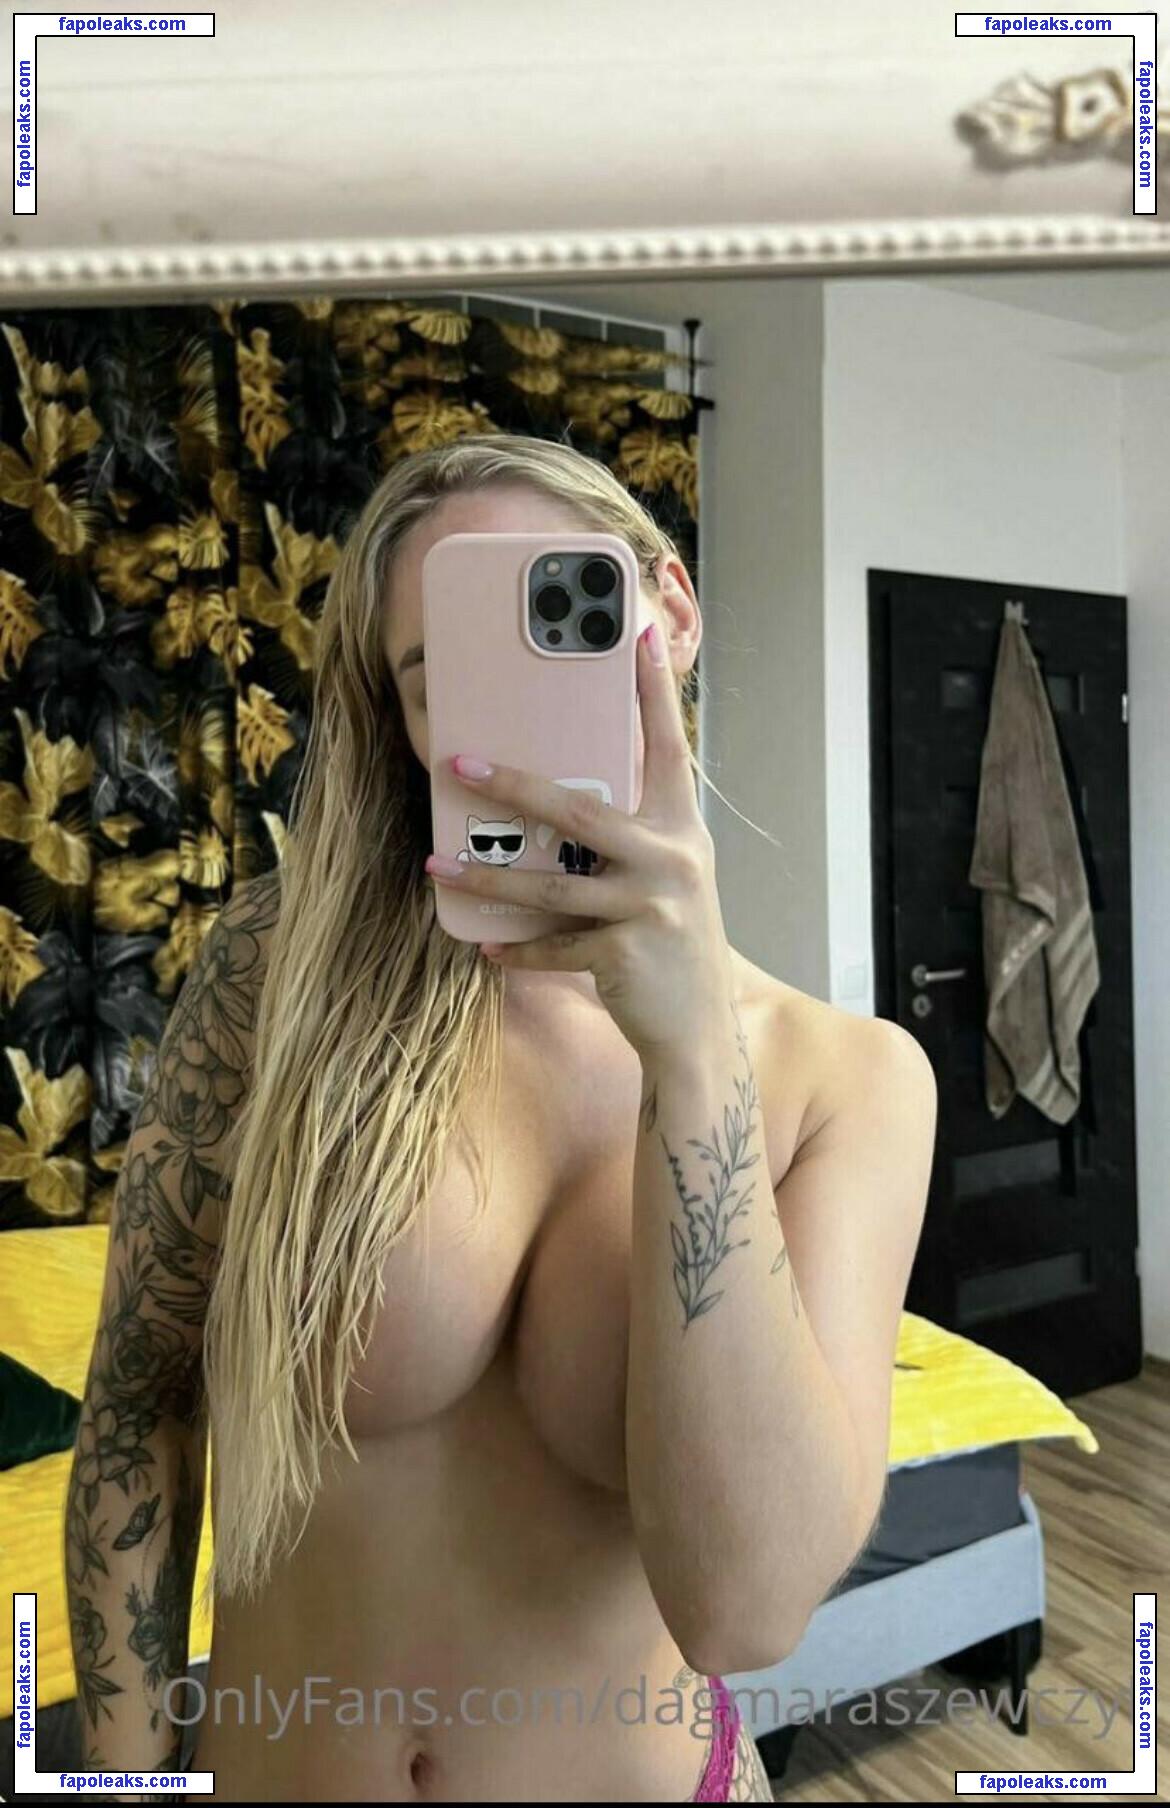 Dagmara Szewczyk / dagmara_szewczyk / dagmaraszewczyk nude photo #0010 from OnlyFans